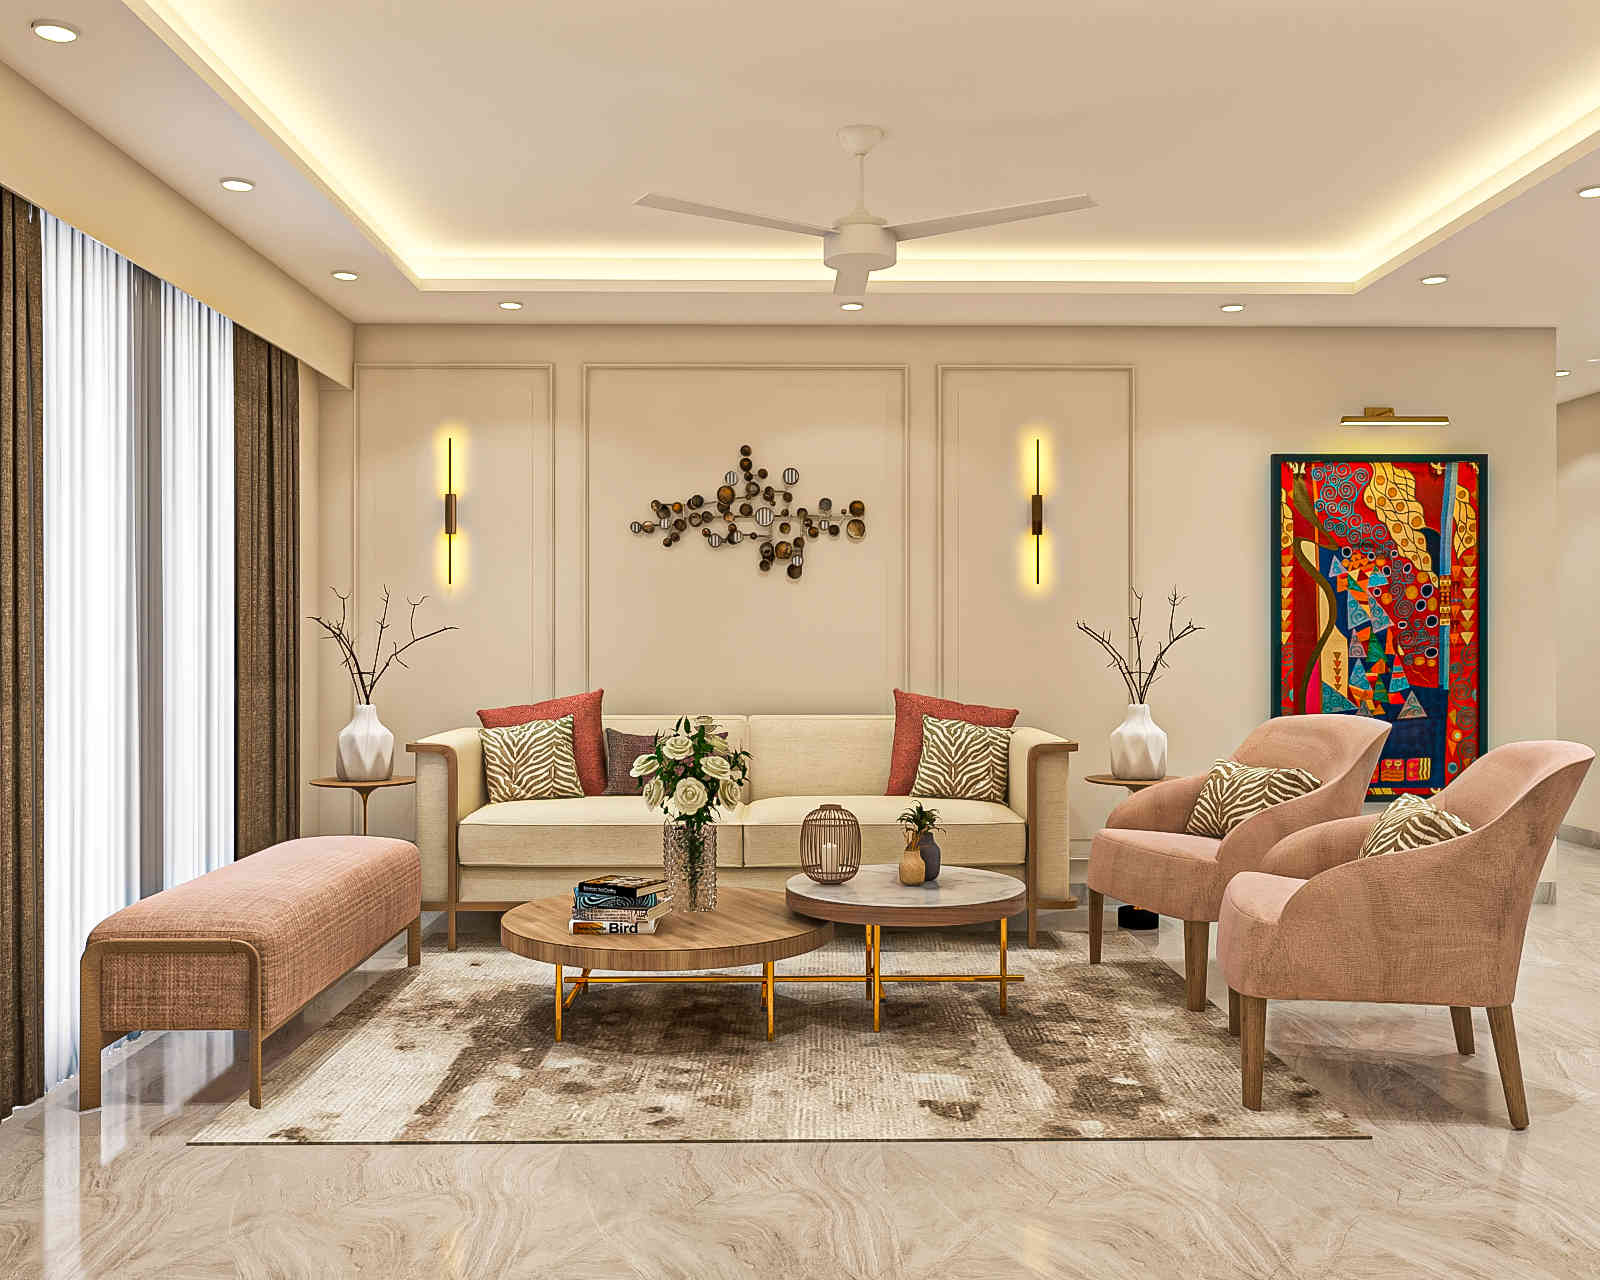 Living Room Design With Wall Décor